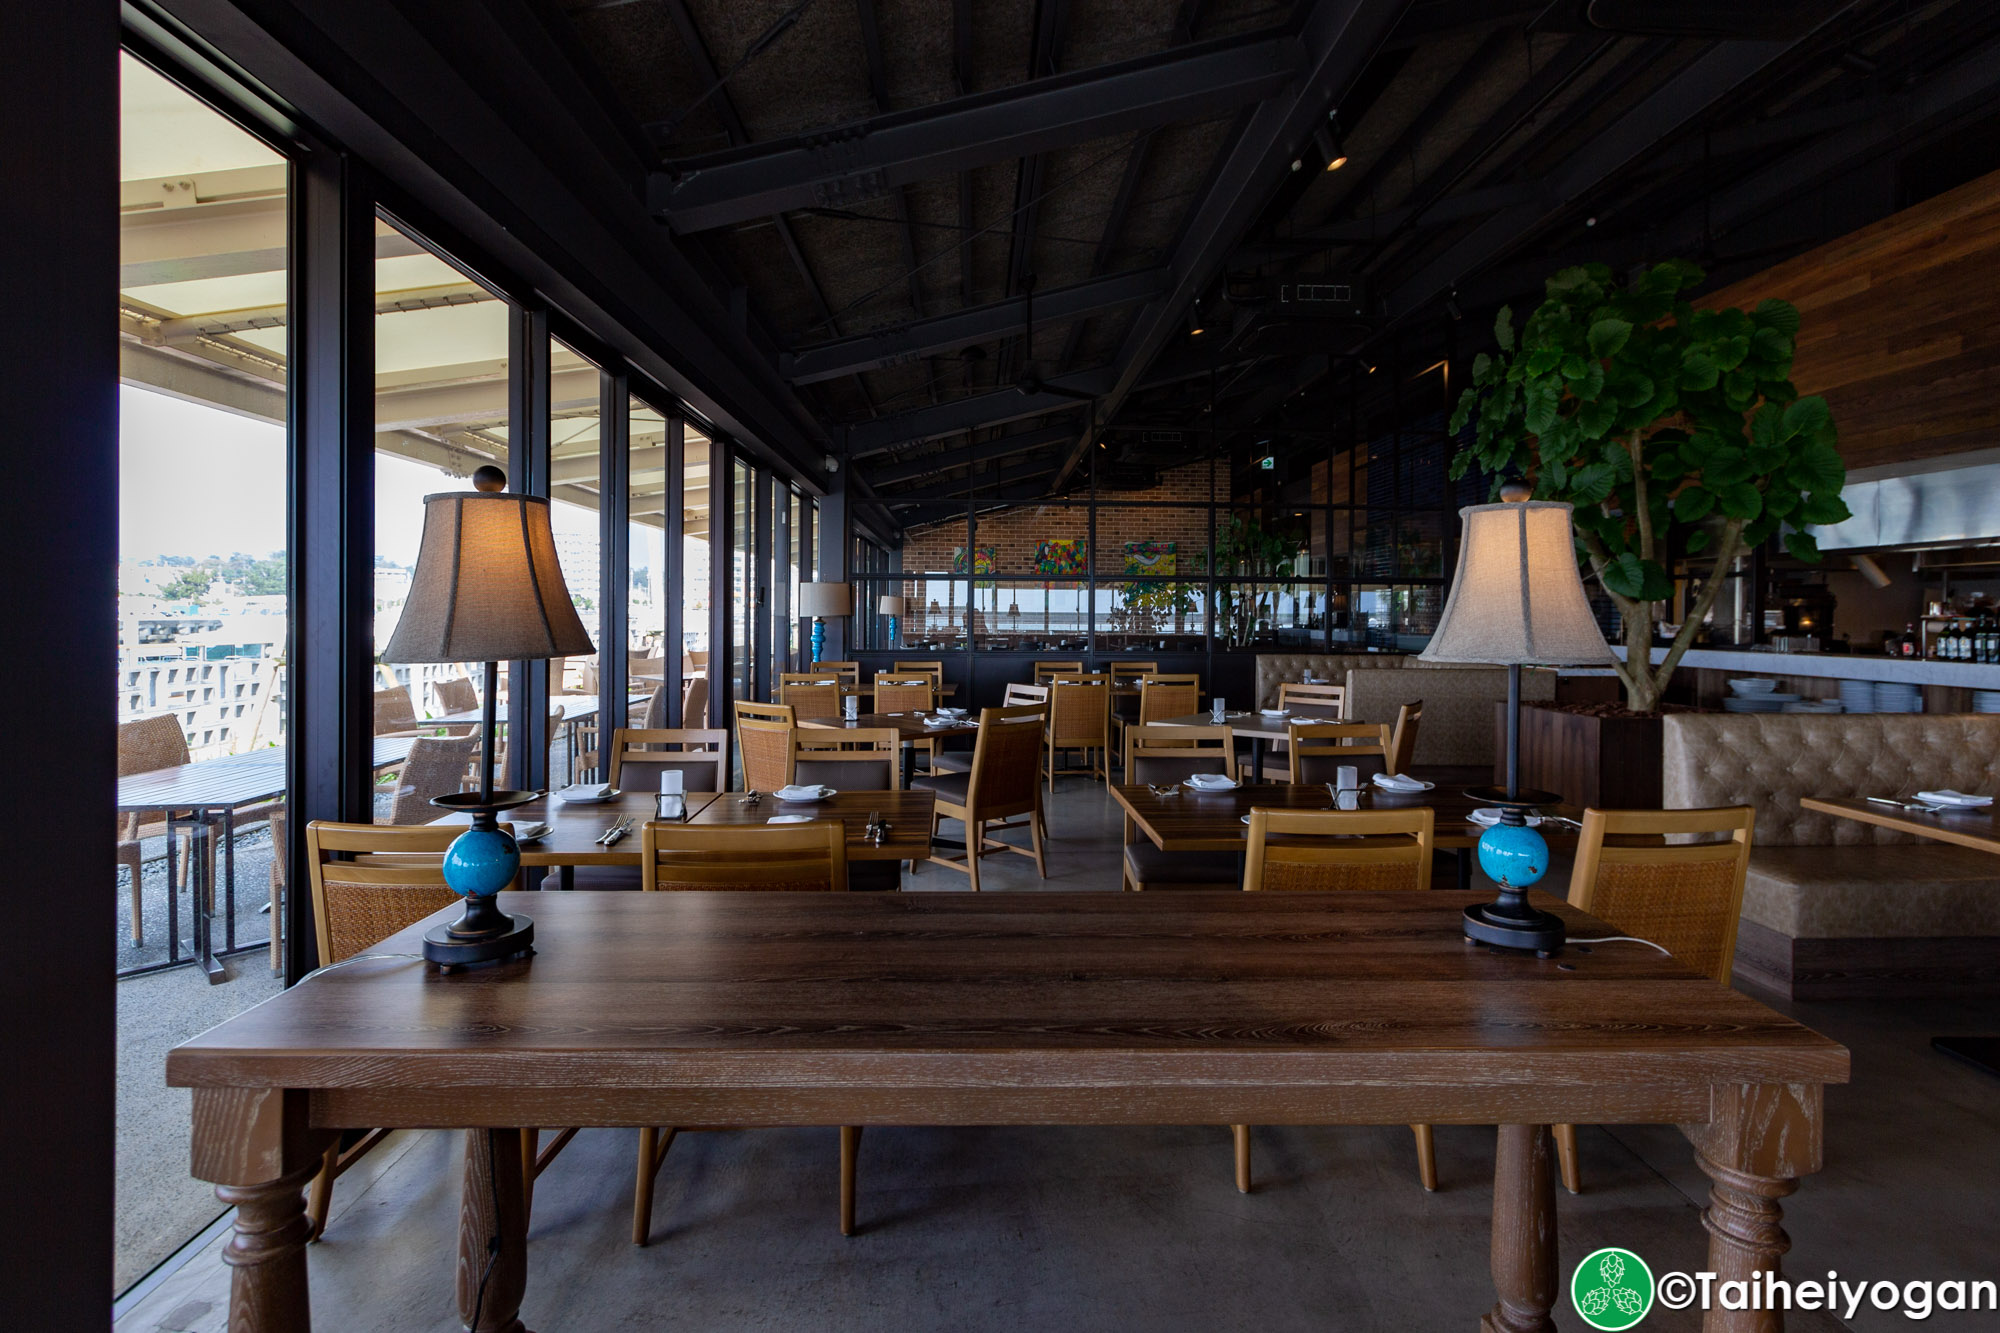 Chatan Harbor Brewery - Interior - Restaurant Section - Table Seating